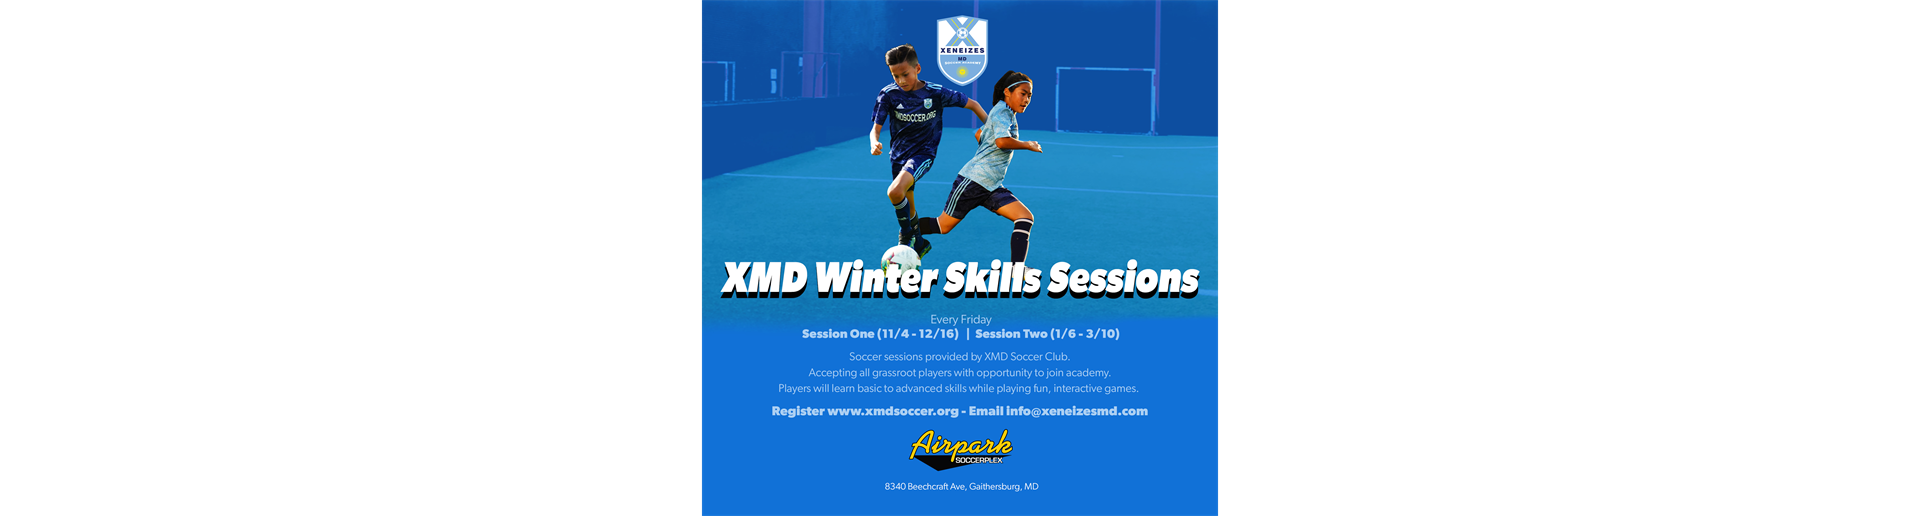 XMD Winter Skills Sessions Are Here!